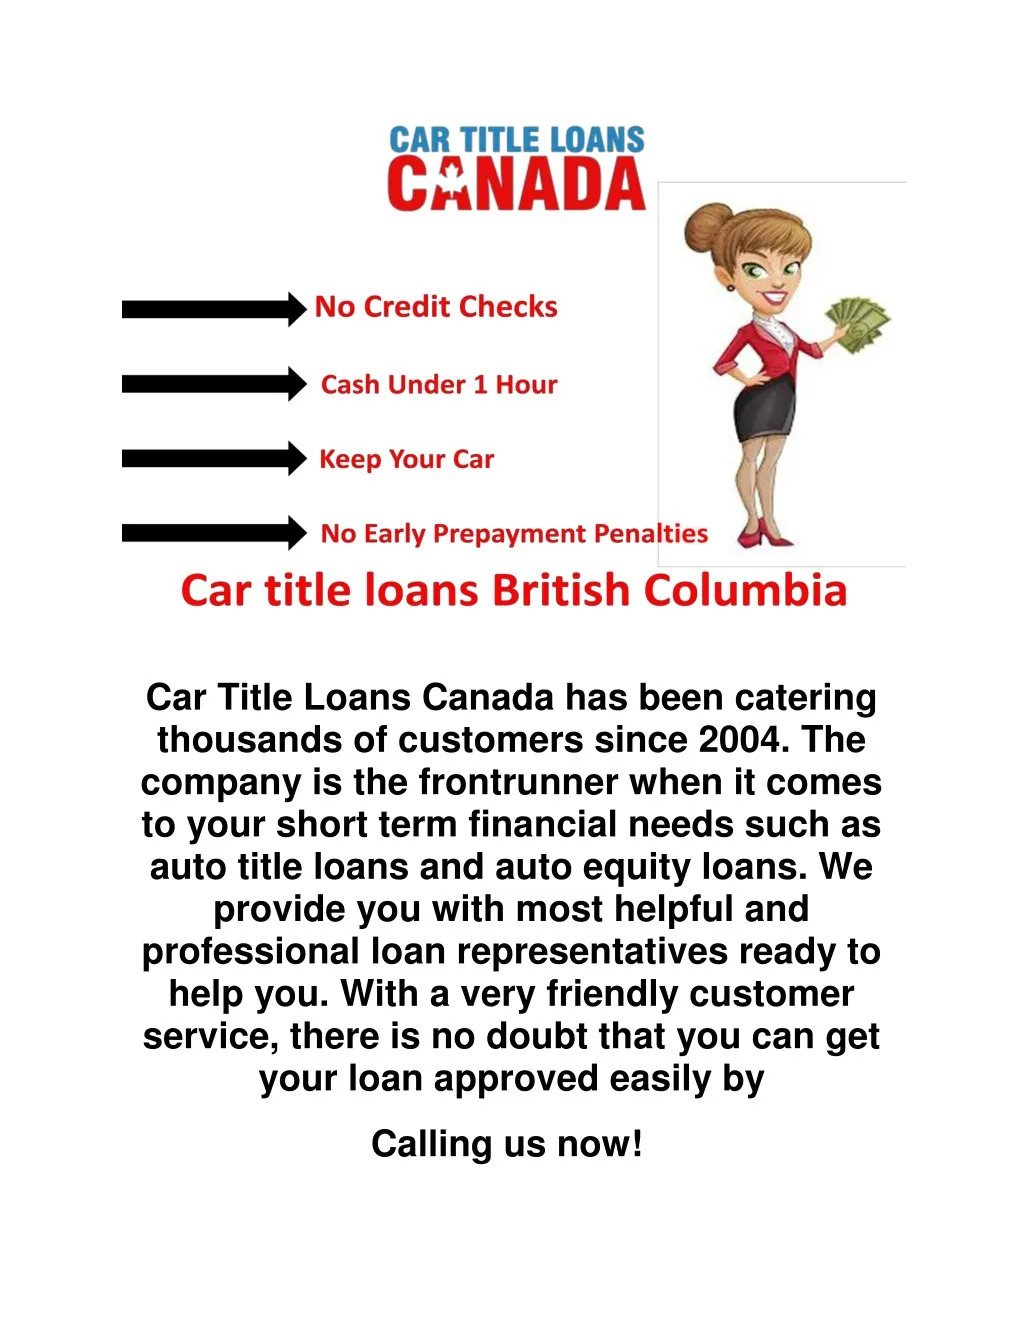 car title loans canada has been catering